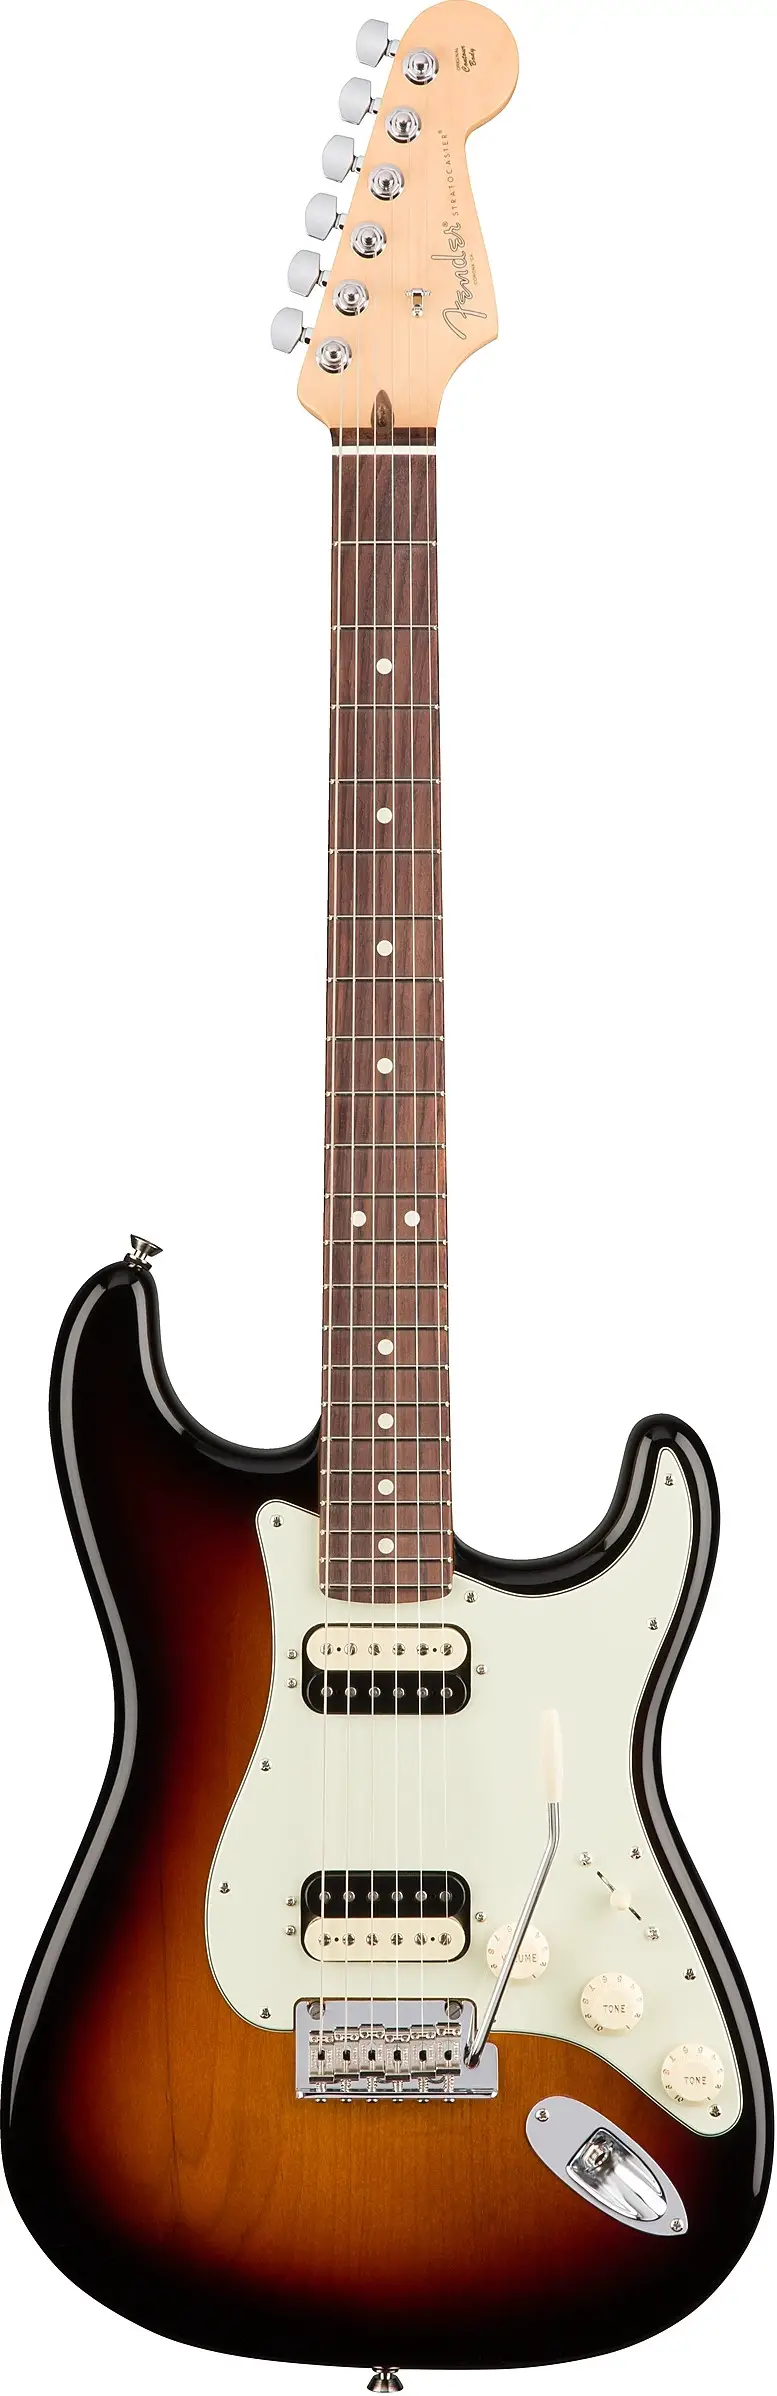 American Professional Stratocaster HH Shawbucker by Fender